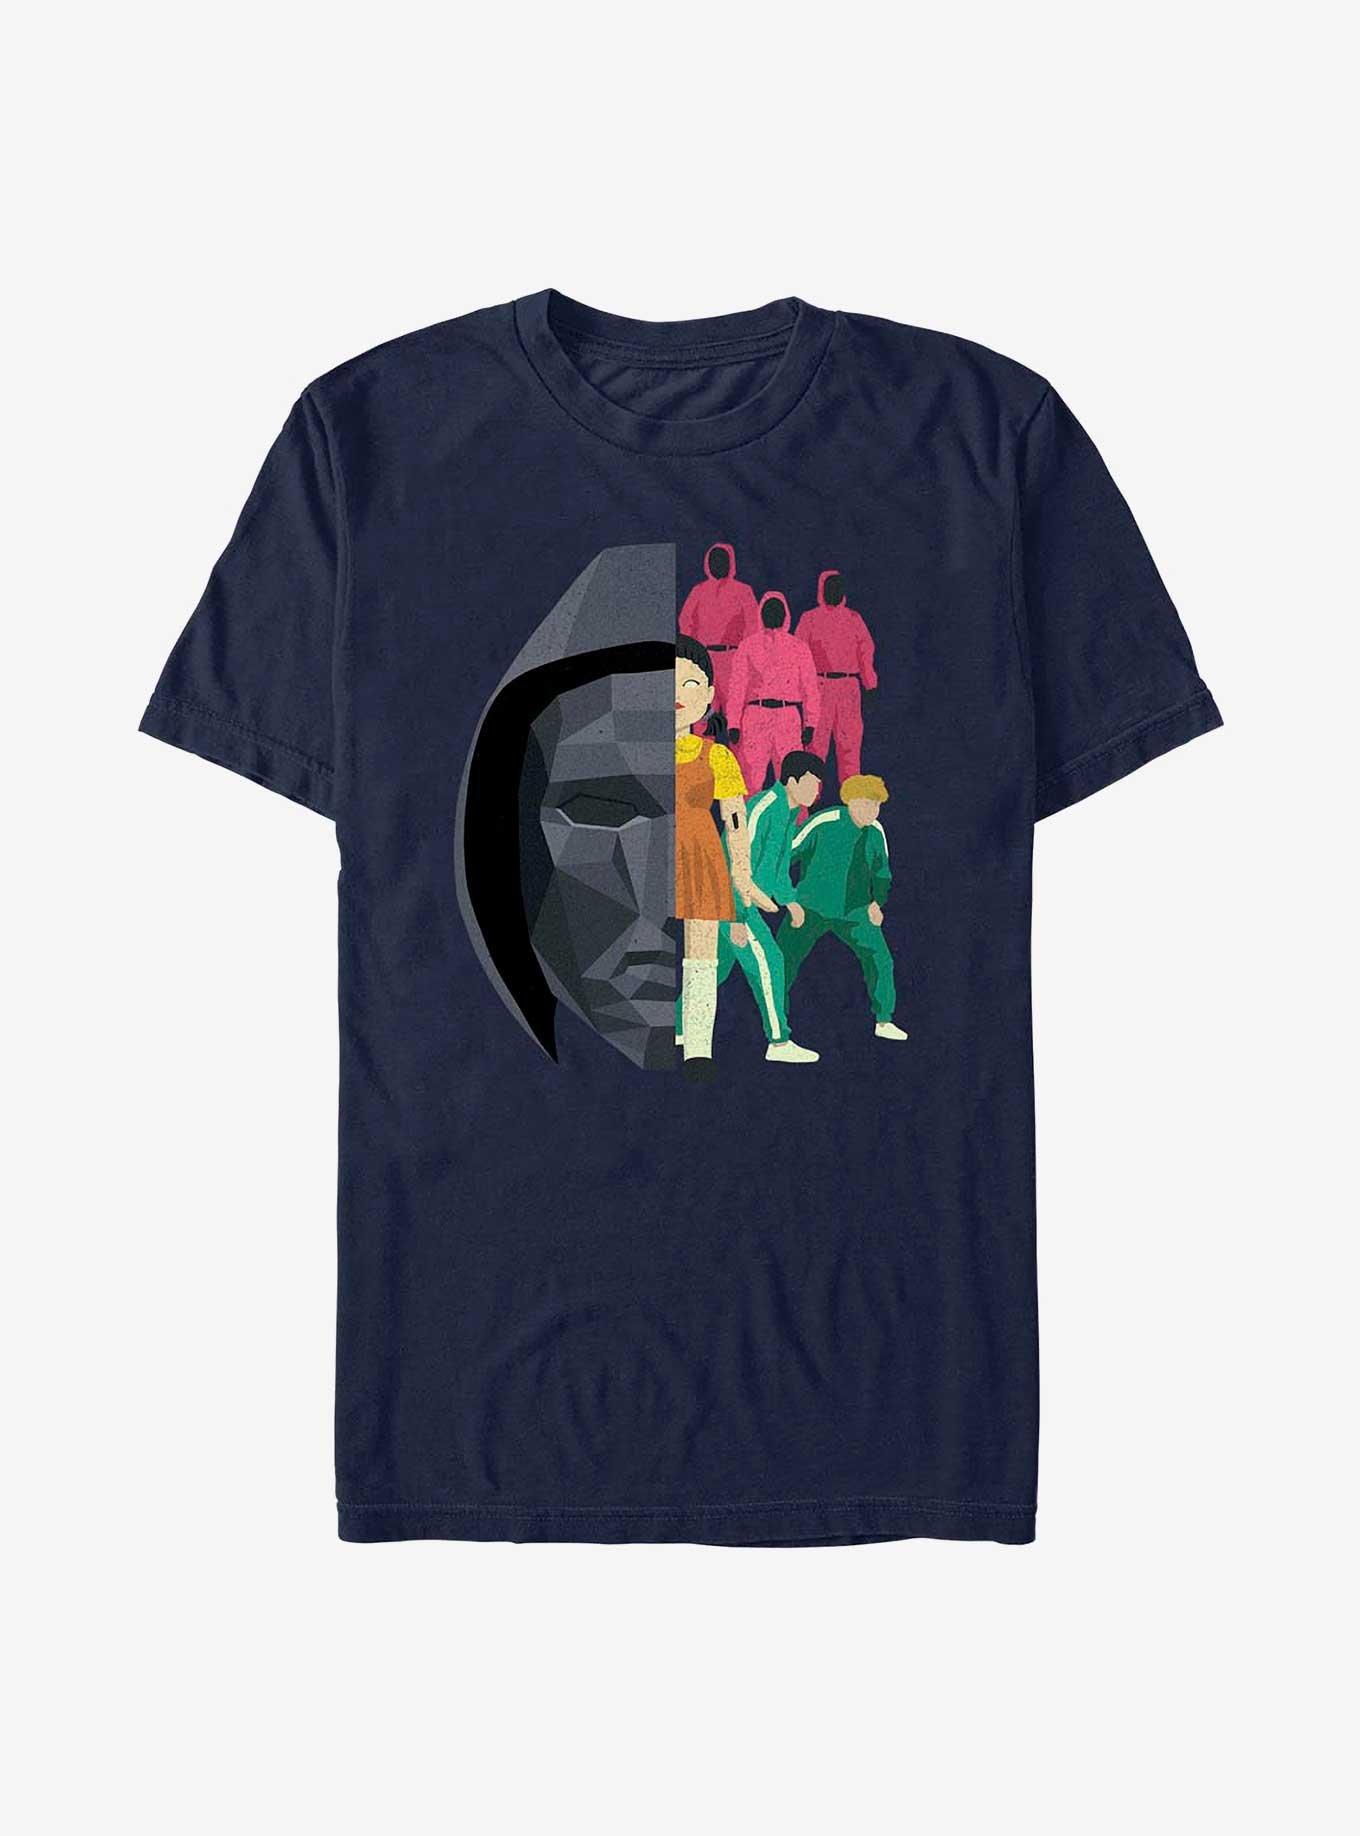 Squid Game Front Man And Suits T-Shirt, NAVY, hi-res